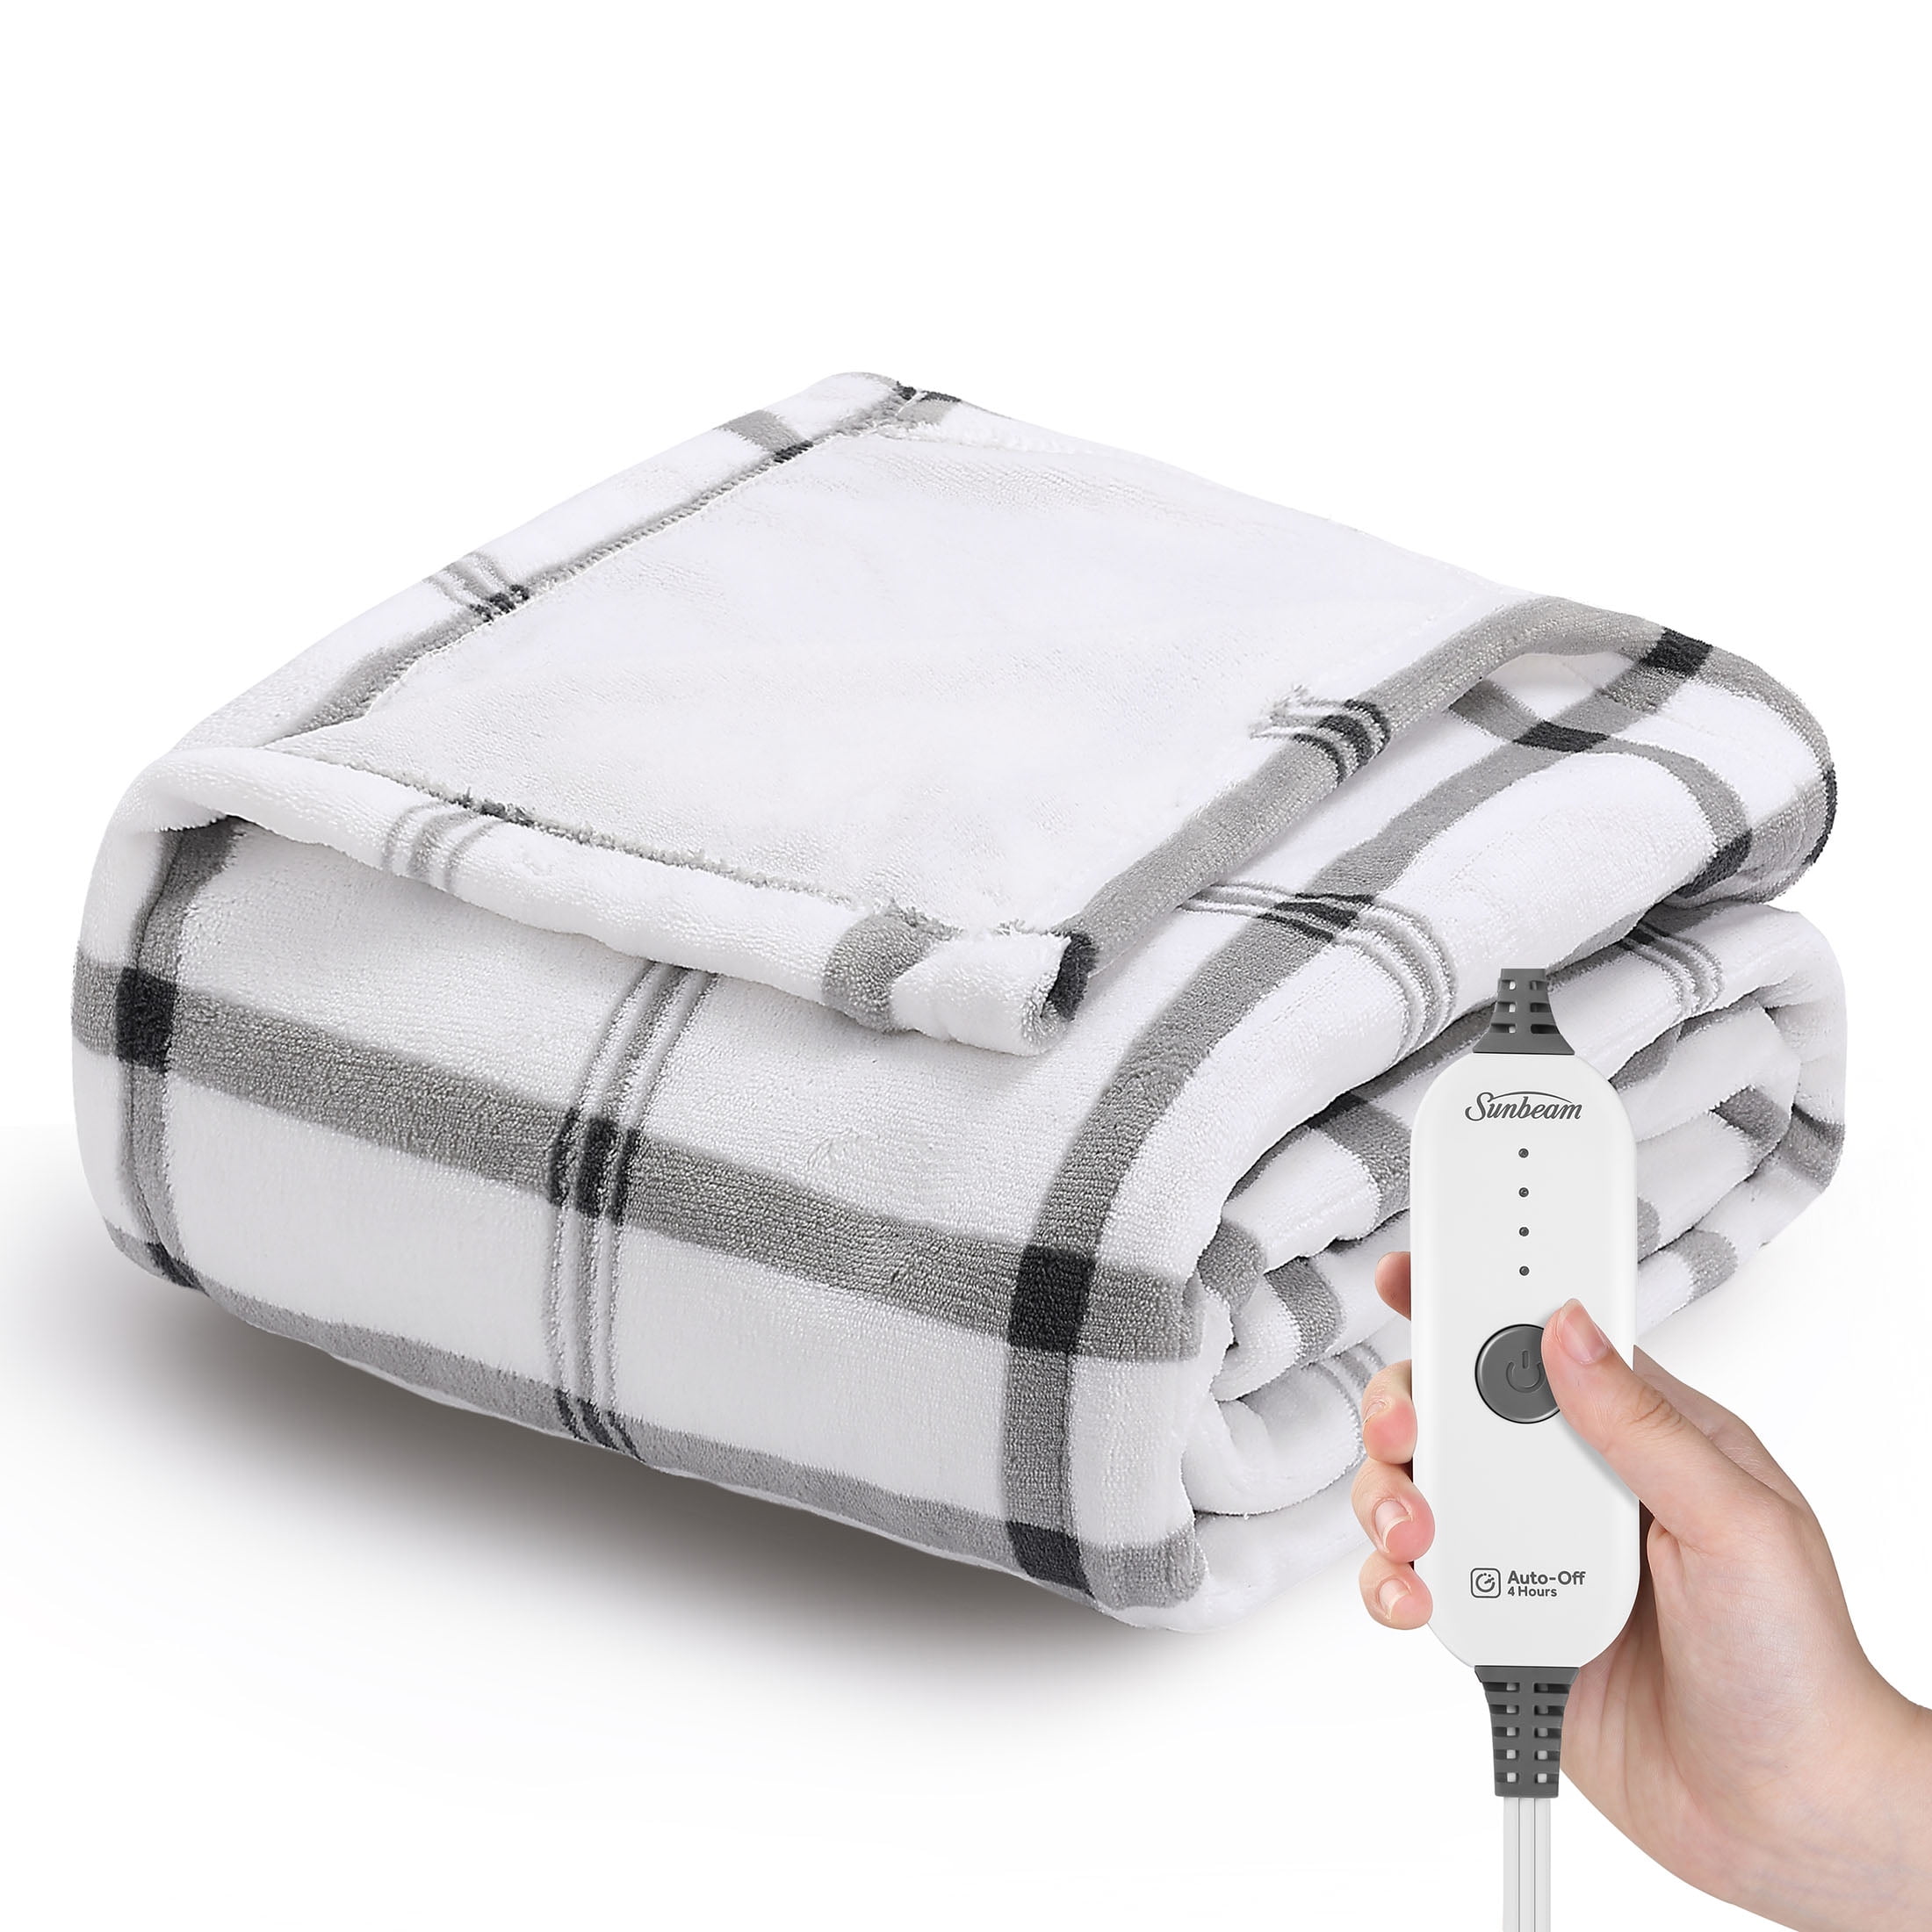 Premium Comfort Single Electric Blanket - Control with 3 Heat Settings,  Polyester, White : : Health & Personal Care